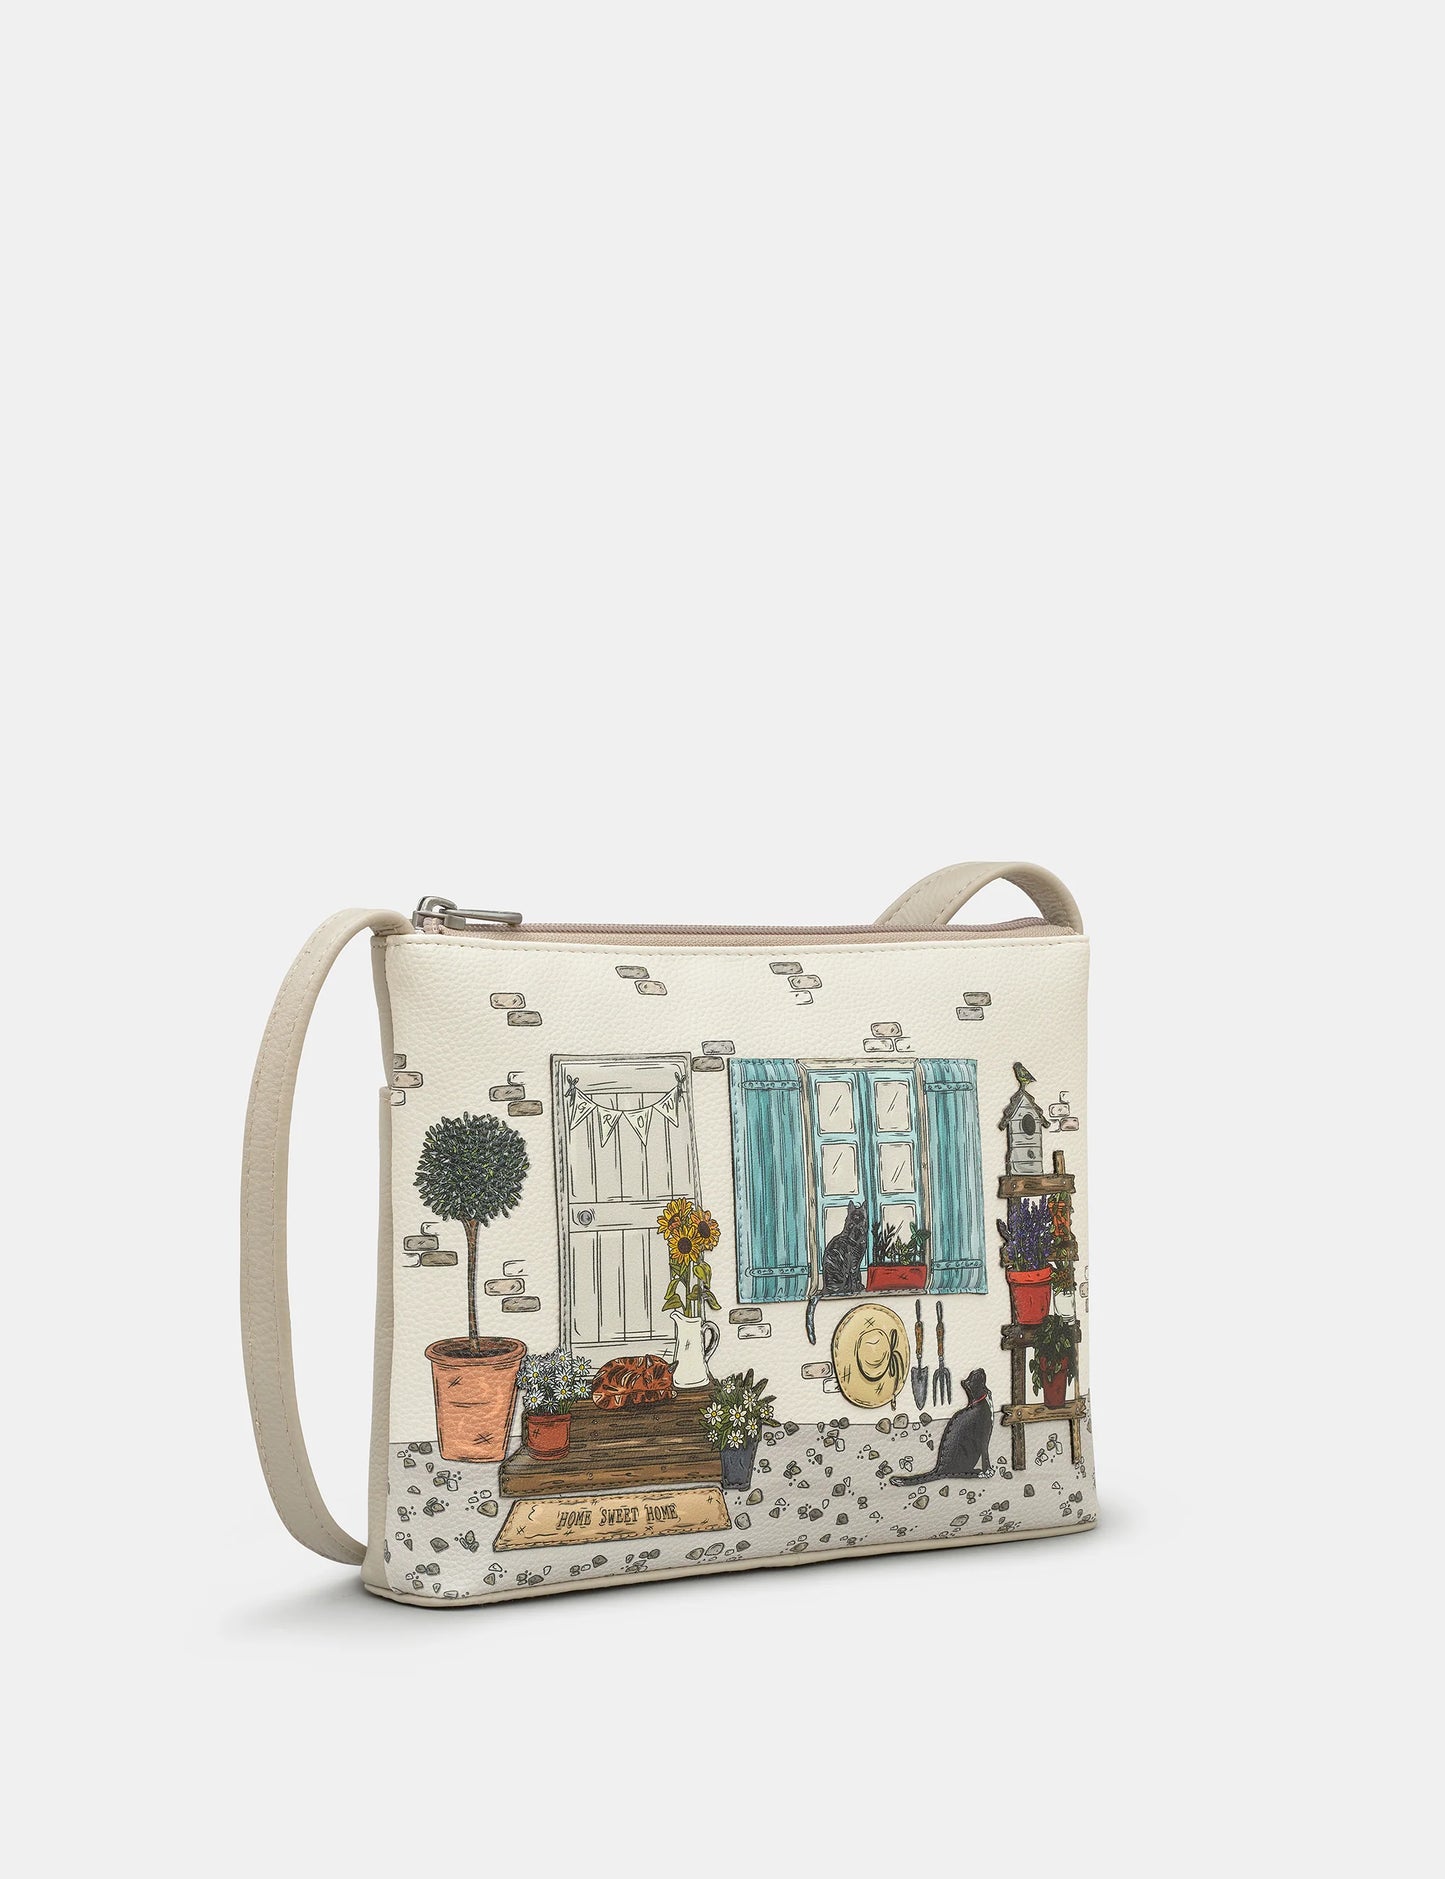 Yoshi YB214 Cats 46 Country Cottage Cross Body Bag